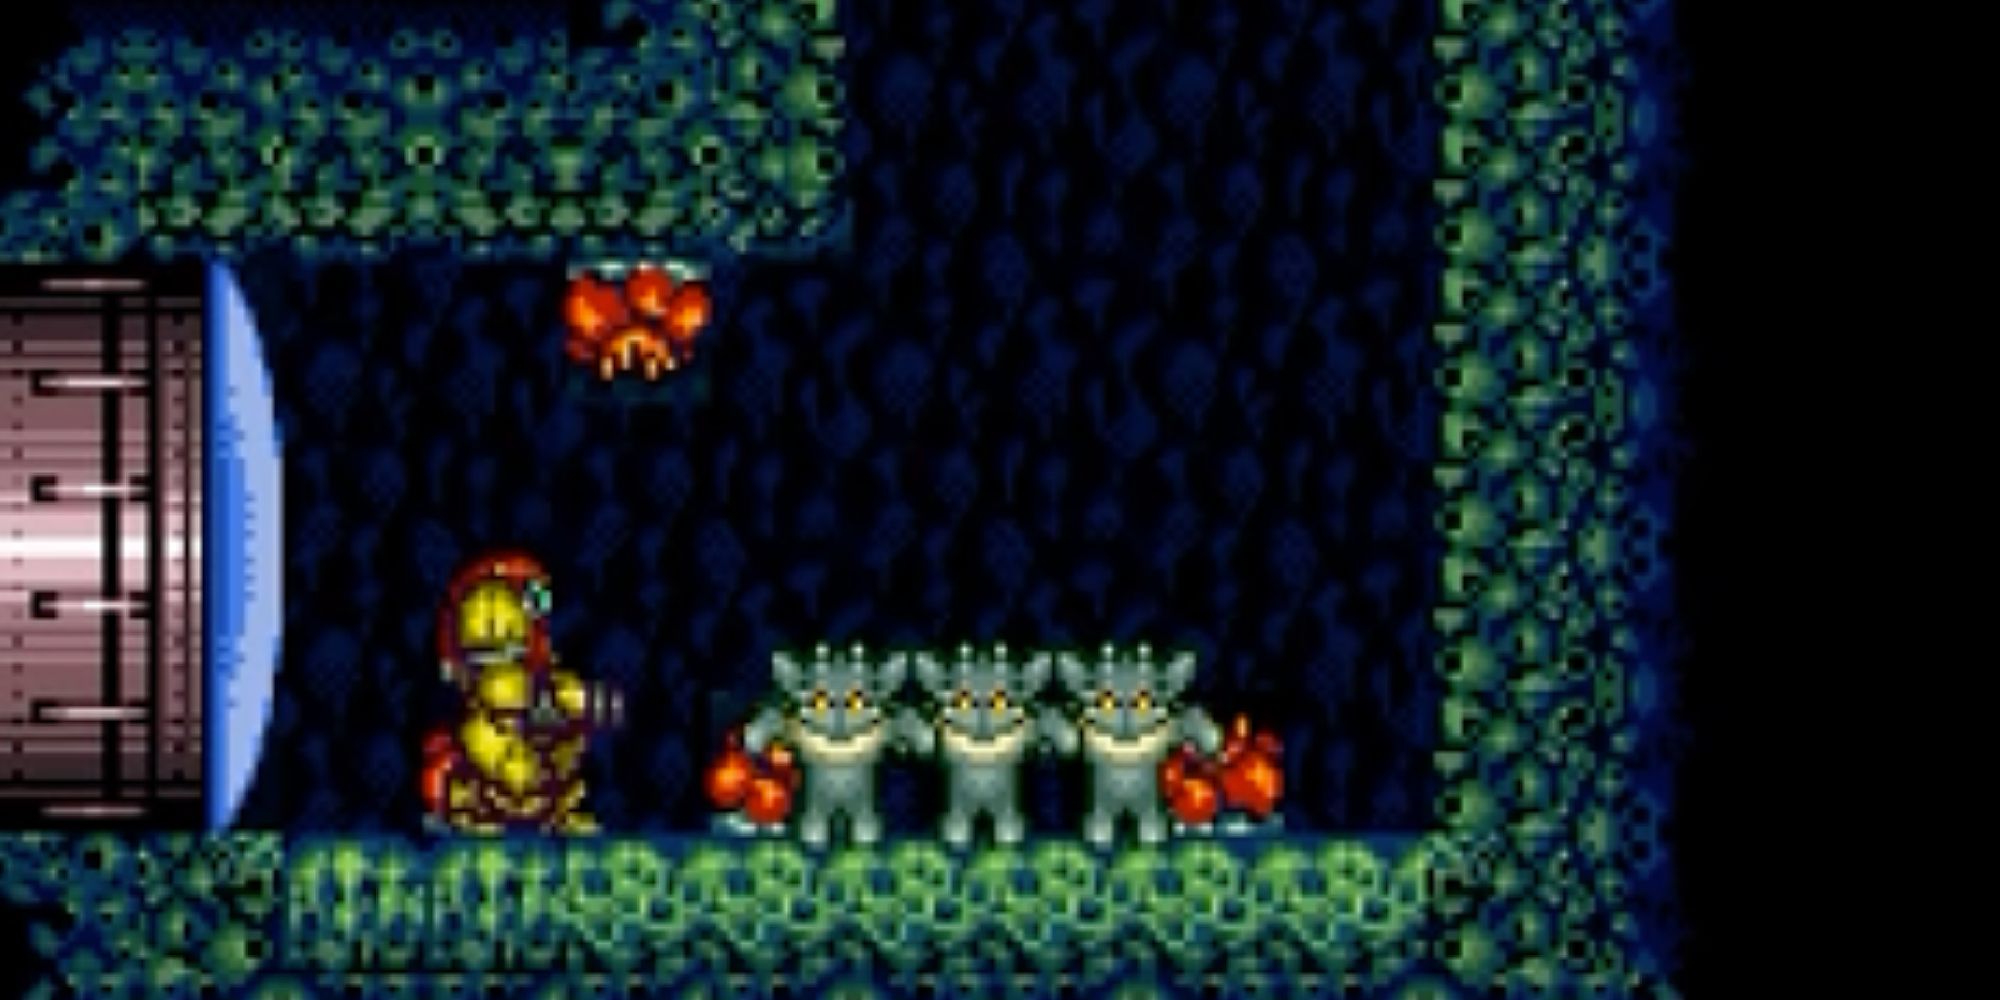 Samus enters the wall jumping room in Super Metroid where three little creatures teach her how to wall jump